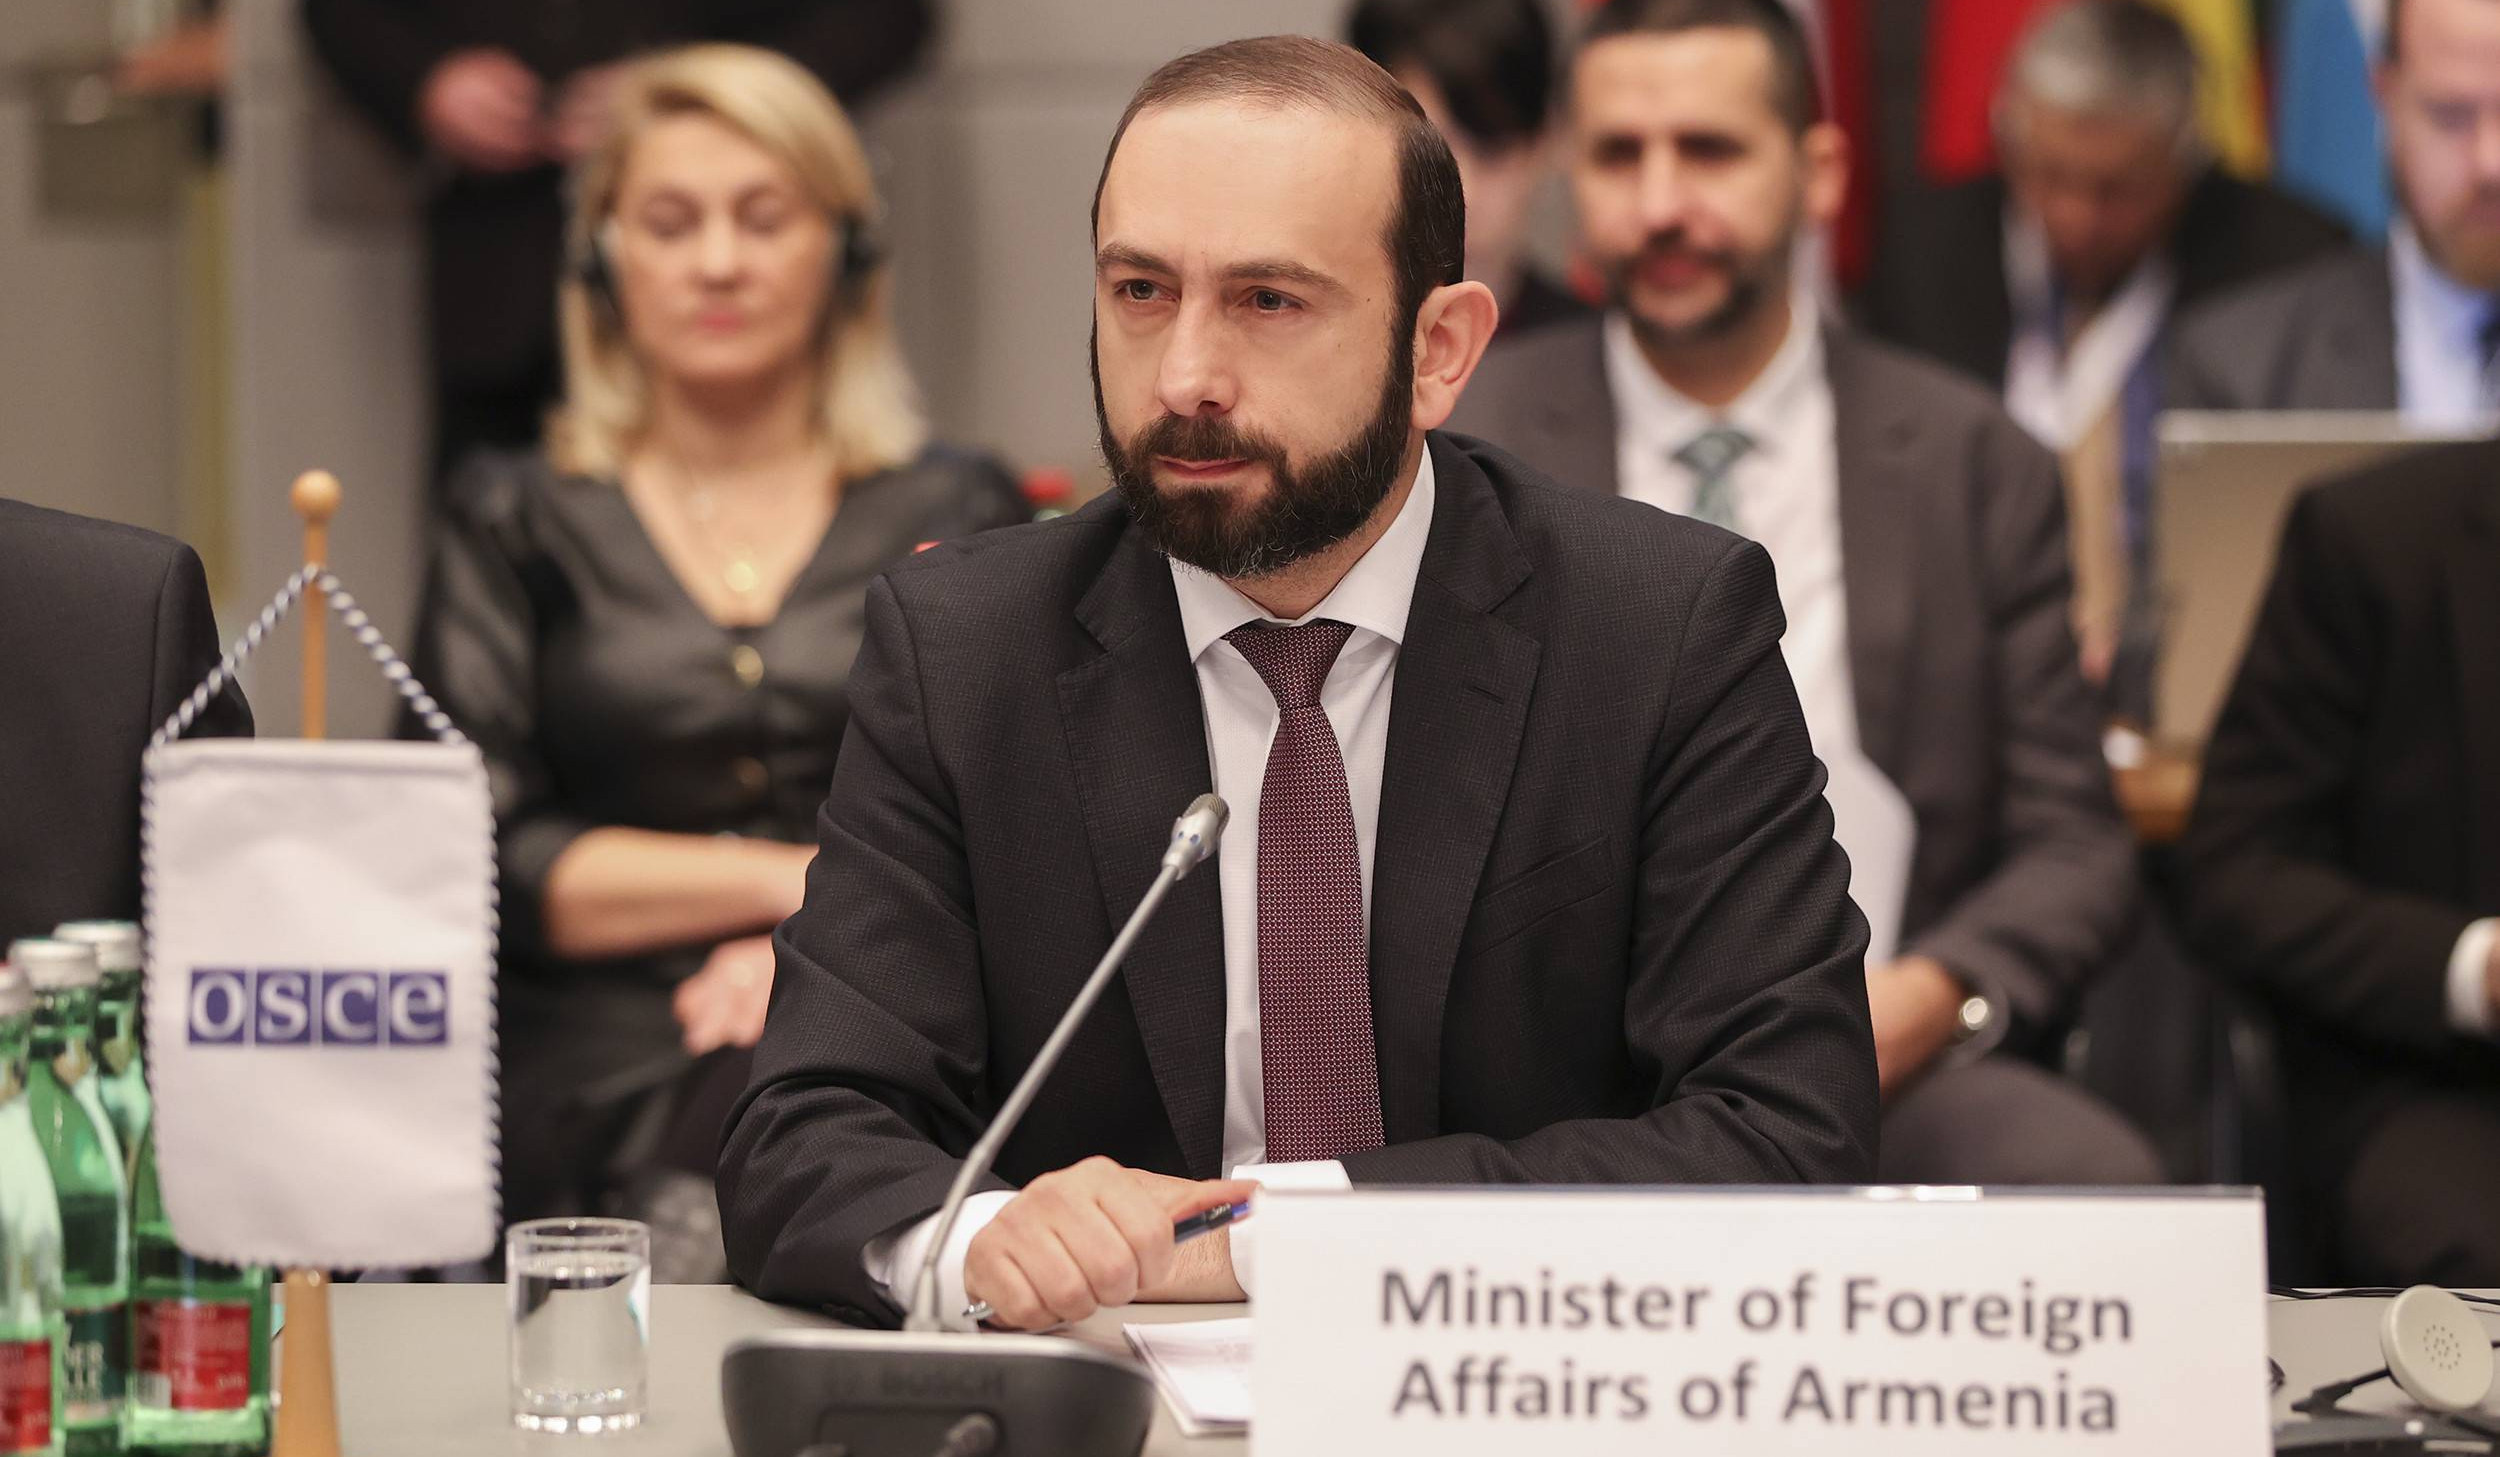 The humanitarian crisis is worsening in Artsakh with each passing day and requires the immediate and targeted intervention of the international community, Ararat Mirzoyan at OSCE Permanent Council